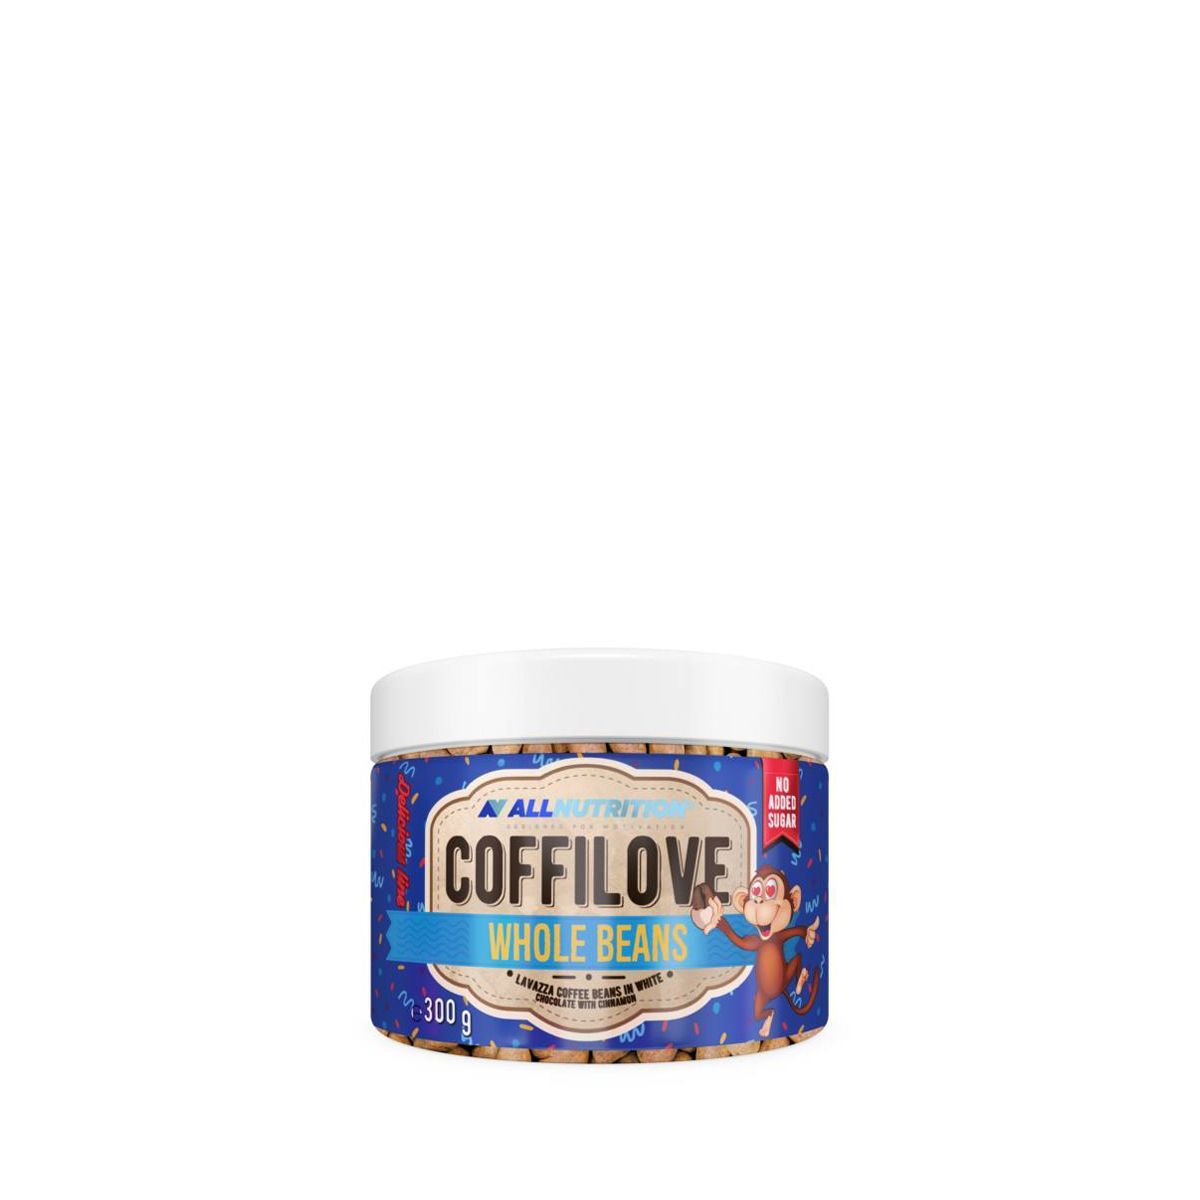 ALLNUTRITION - COFFILOVE WHOLE BEANS - ARABICA COFFEE BEANS IN WHITE CHOCOLATE WITCH CINNAMON - 300 G